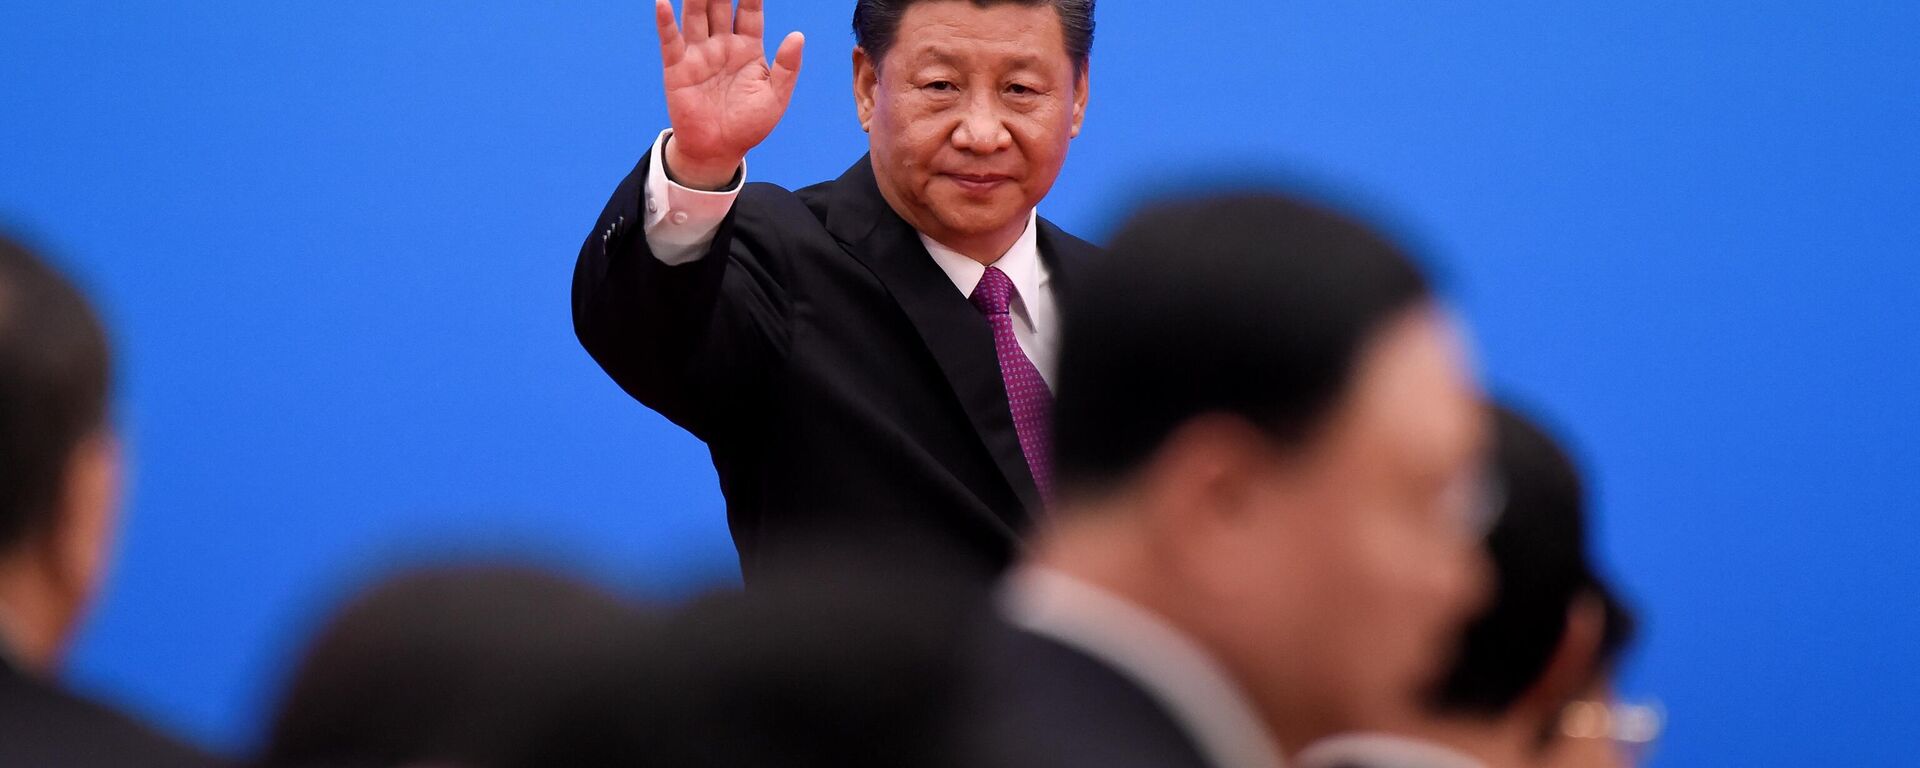 China's President Xi Jinping waves as he leaves after a press conference at the end of the final day of the Belt and Road Forum at the China National Convention Centere at the Yanqi Lake venue outside Beijing on April 27, 2019 - Sputnik International, 1920, 09.05.2023